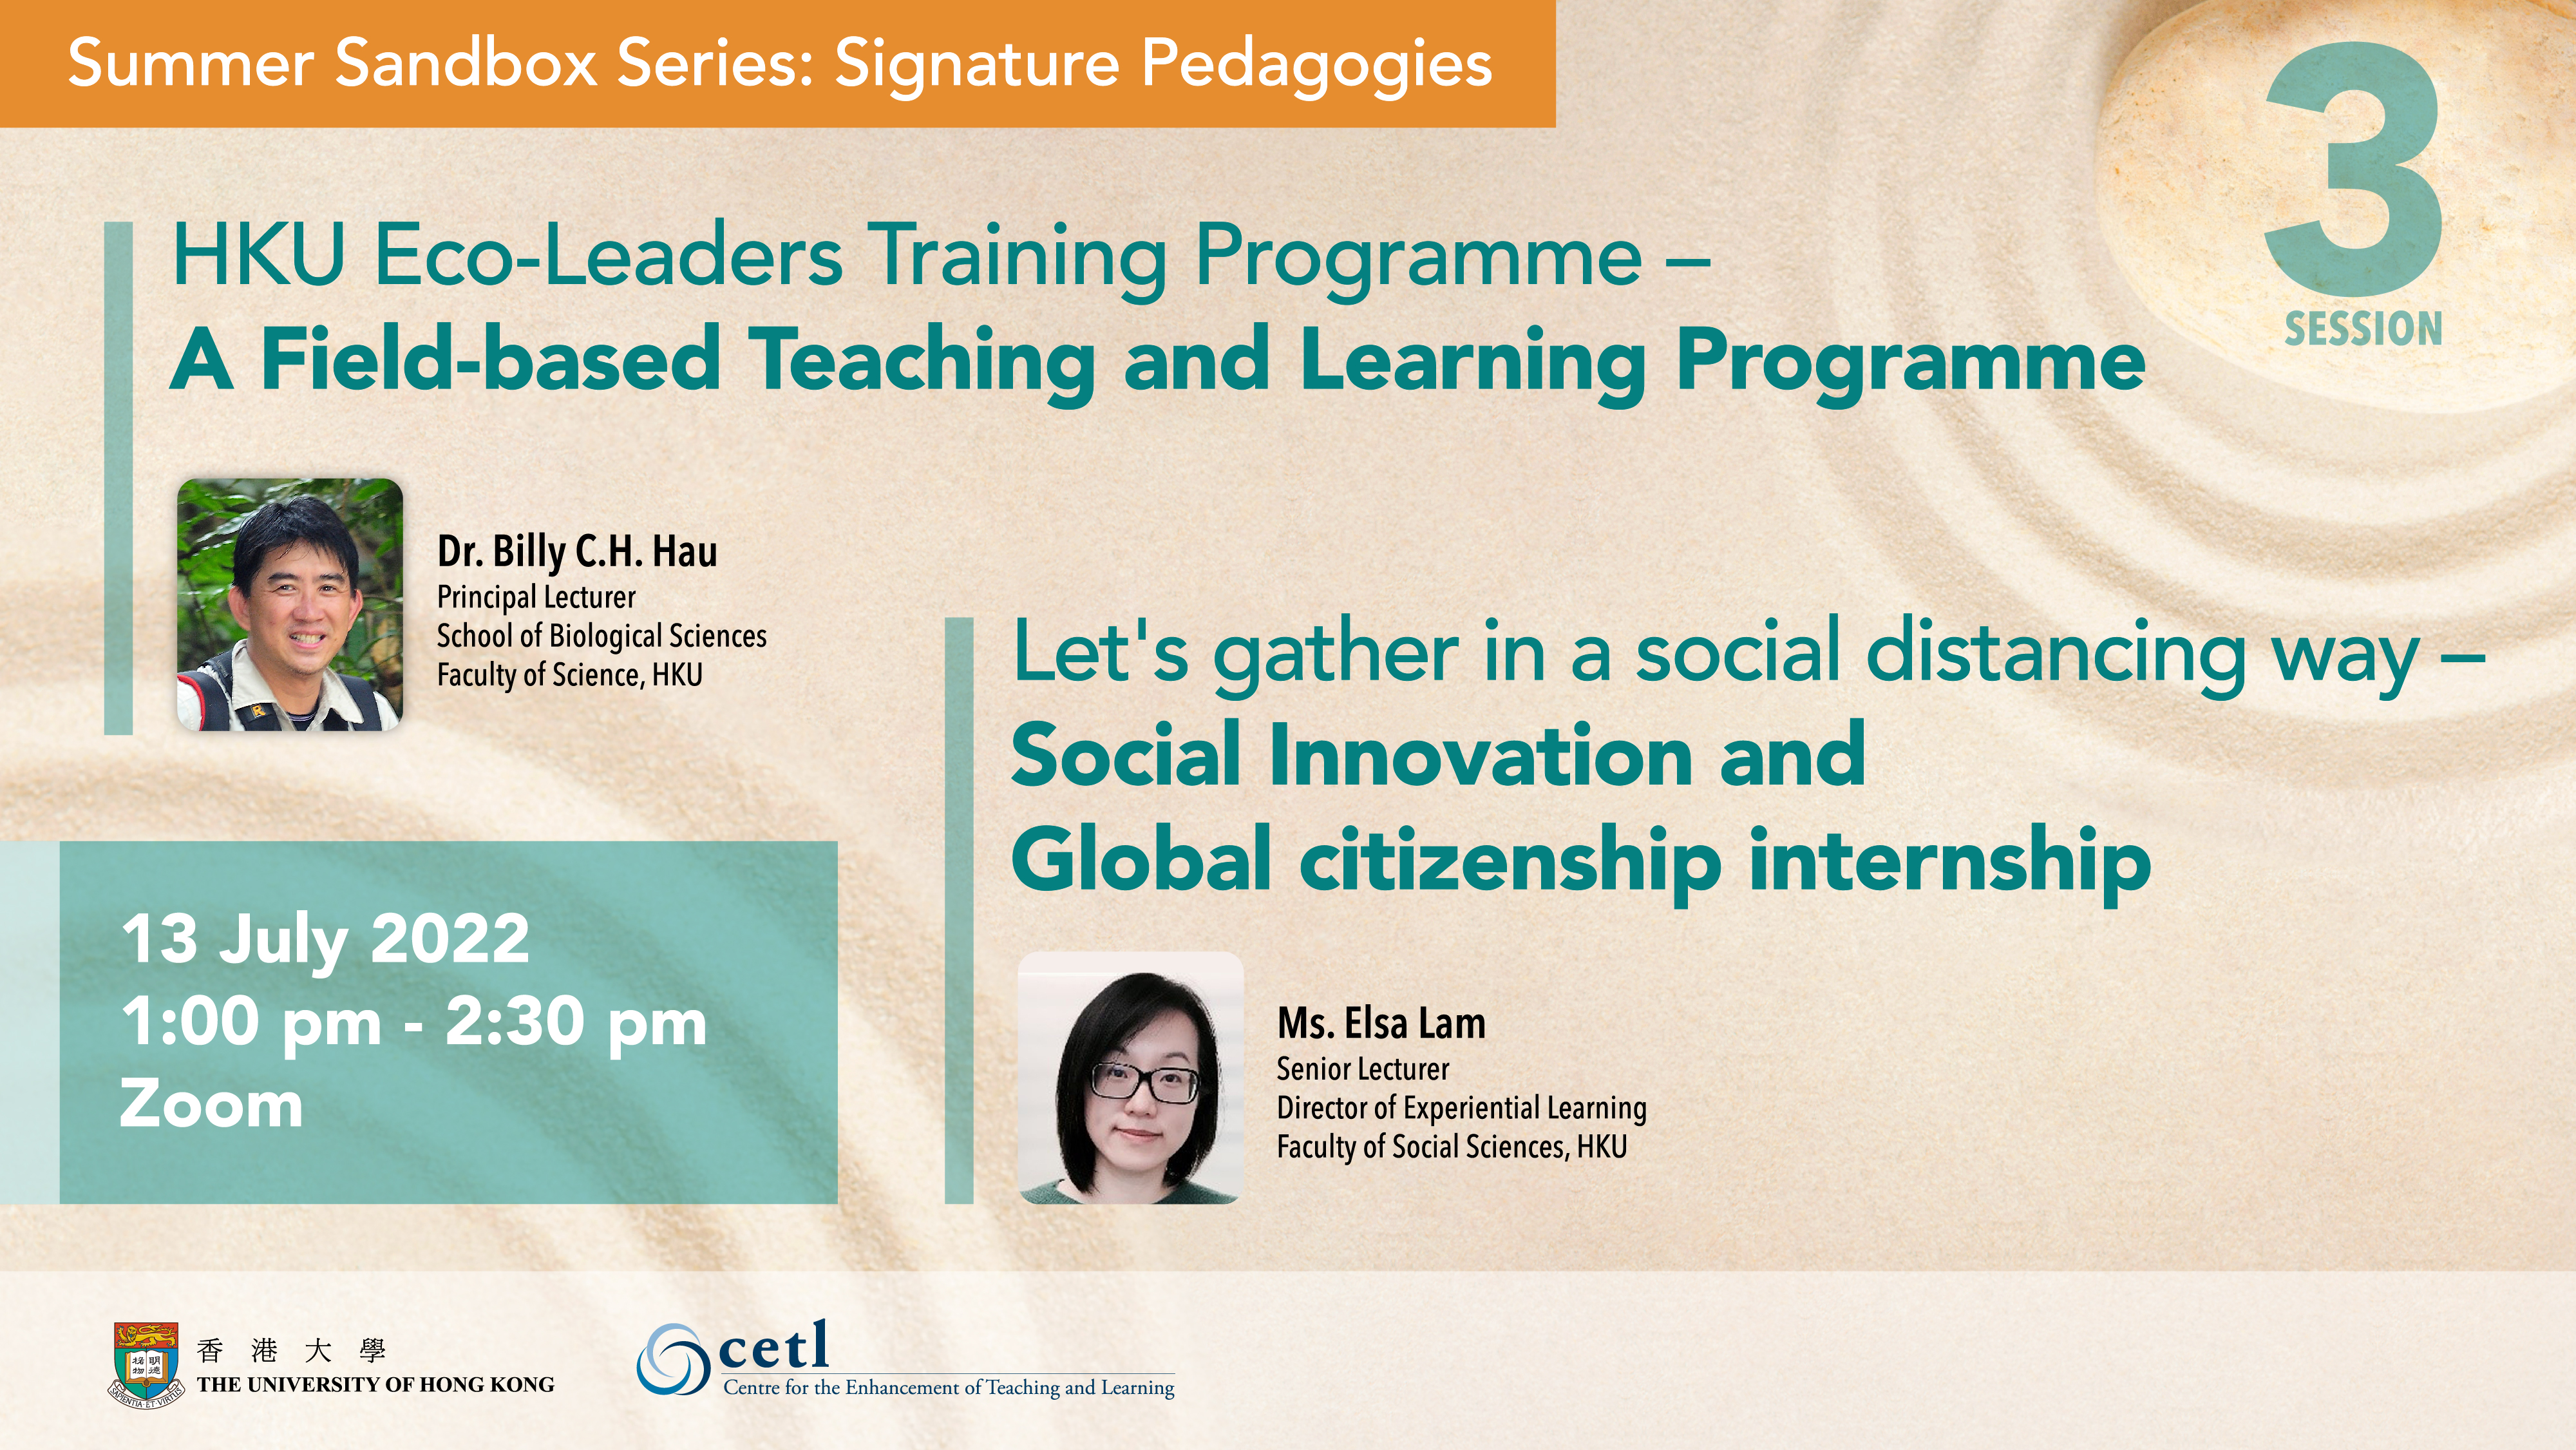 Session 3: HKU Eco-Leaders Training Programme – A Field-based Teaching and Learning Programme & Let's gather in a social distancing way – Social Innovation and Global citizenship internship